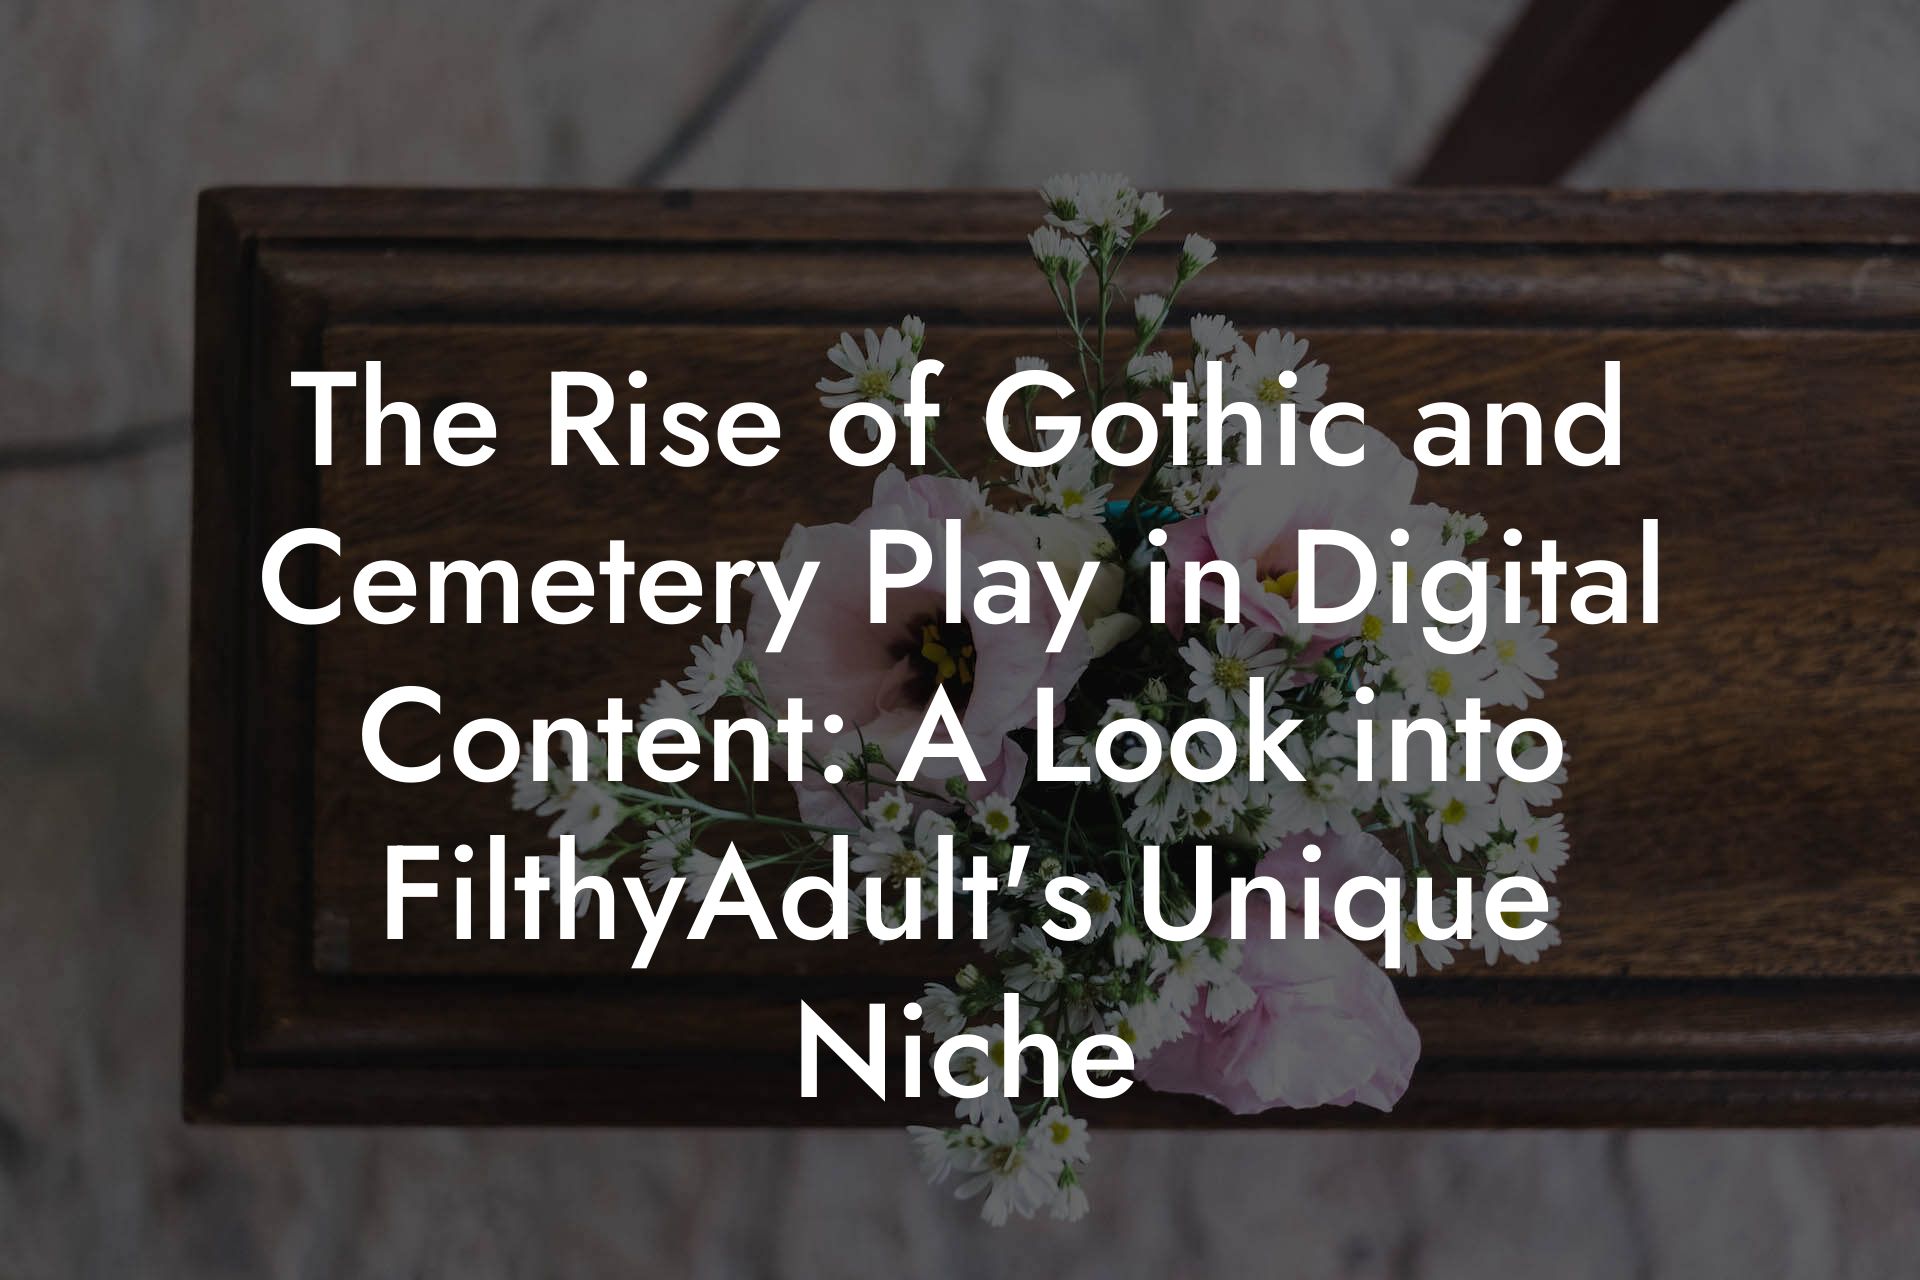 The Rise of Gothic and Cemetery Play in Digital Content: A Look into FilthyAdult's Unique Niche